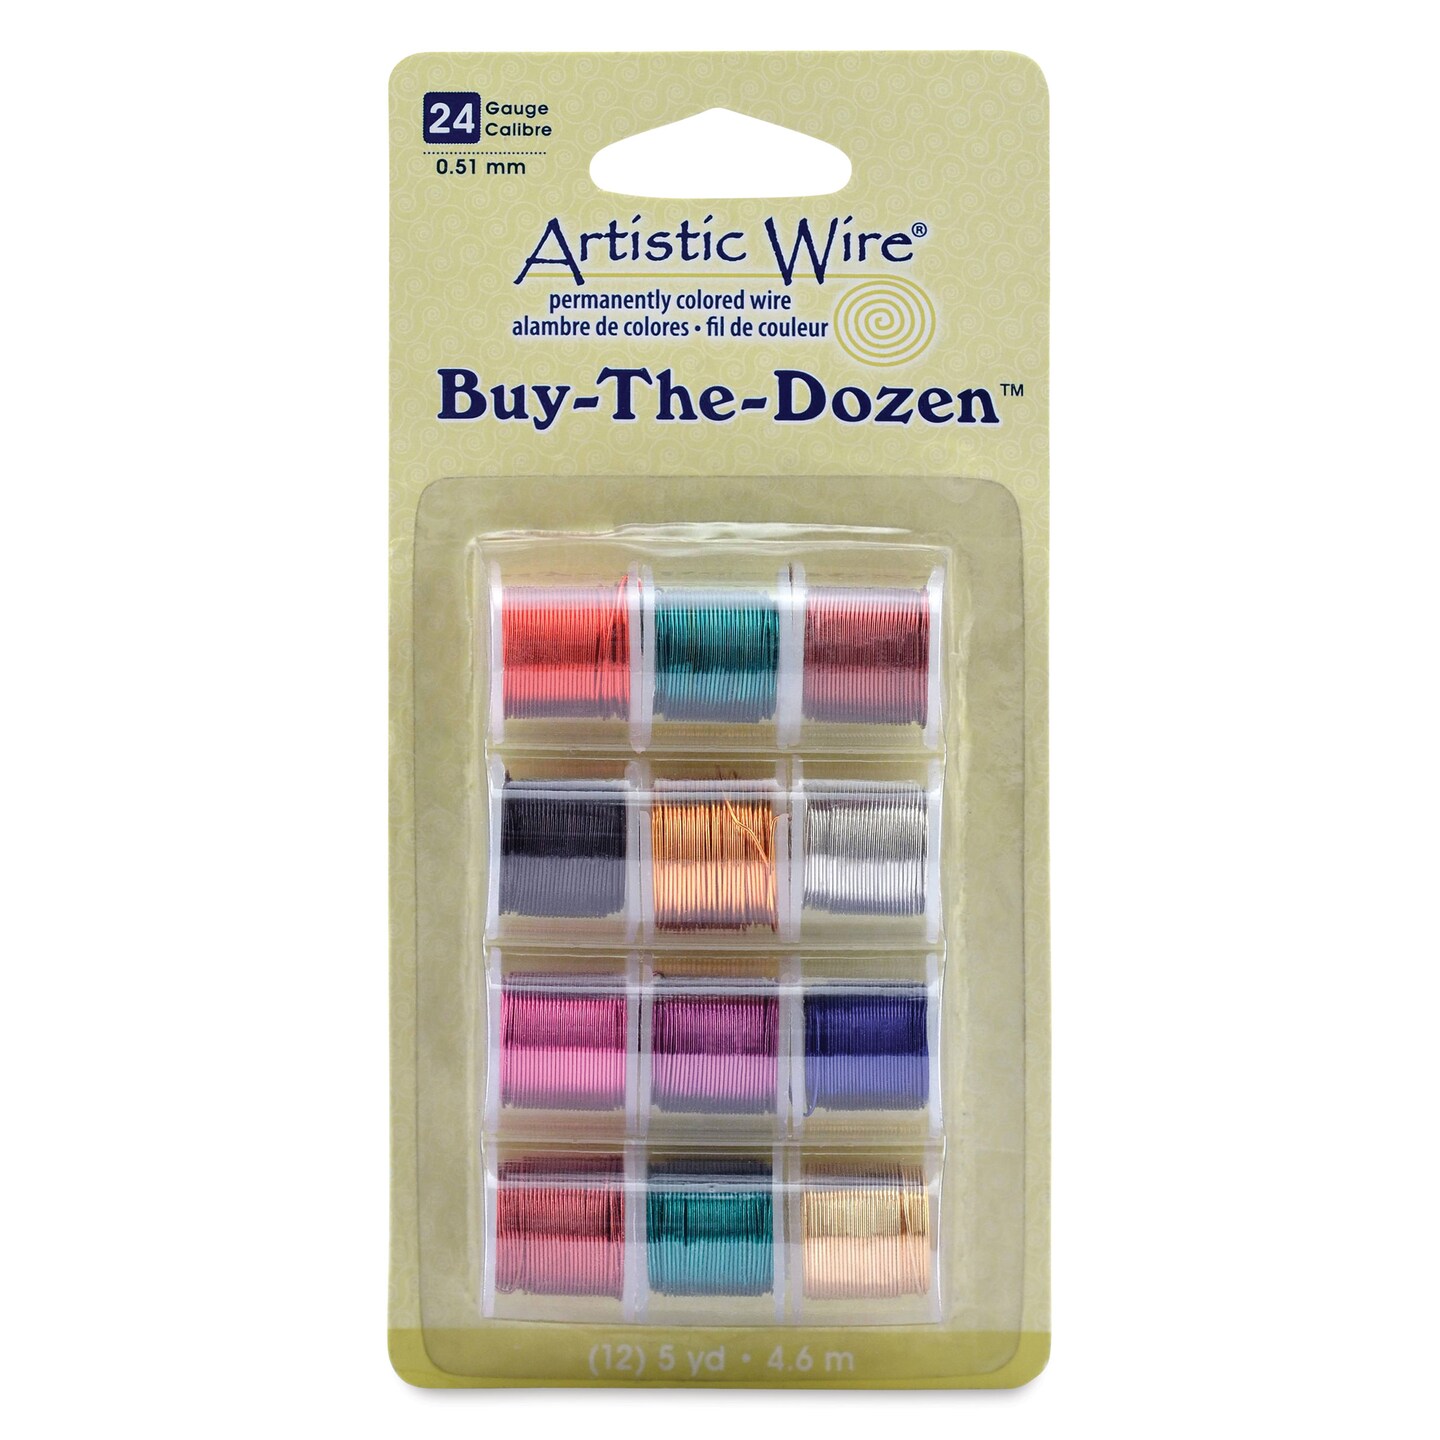 Artistic Wire Colored Copper Craft Wire - Buy-The-Dozen, Assorted Colors, 24 Gauge, 15 ft, Set of 12